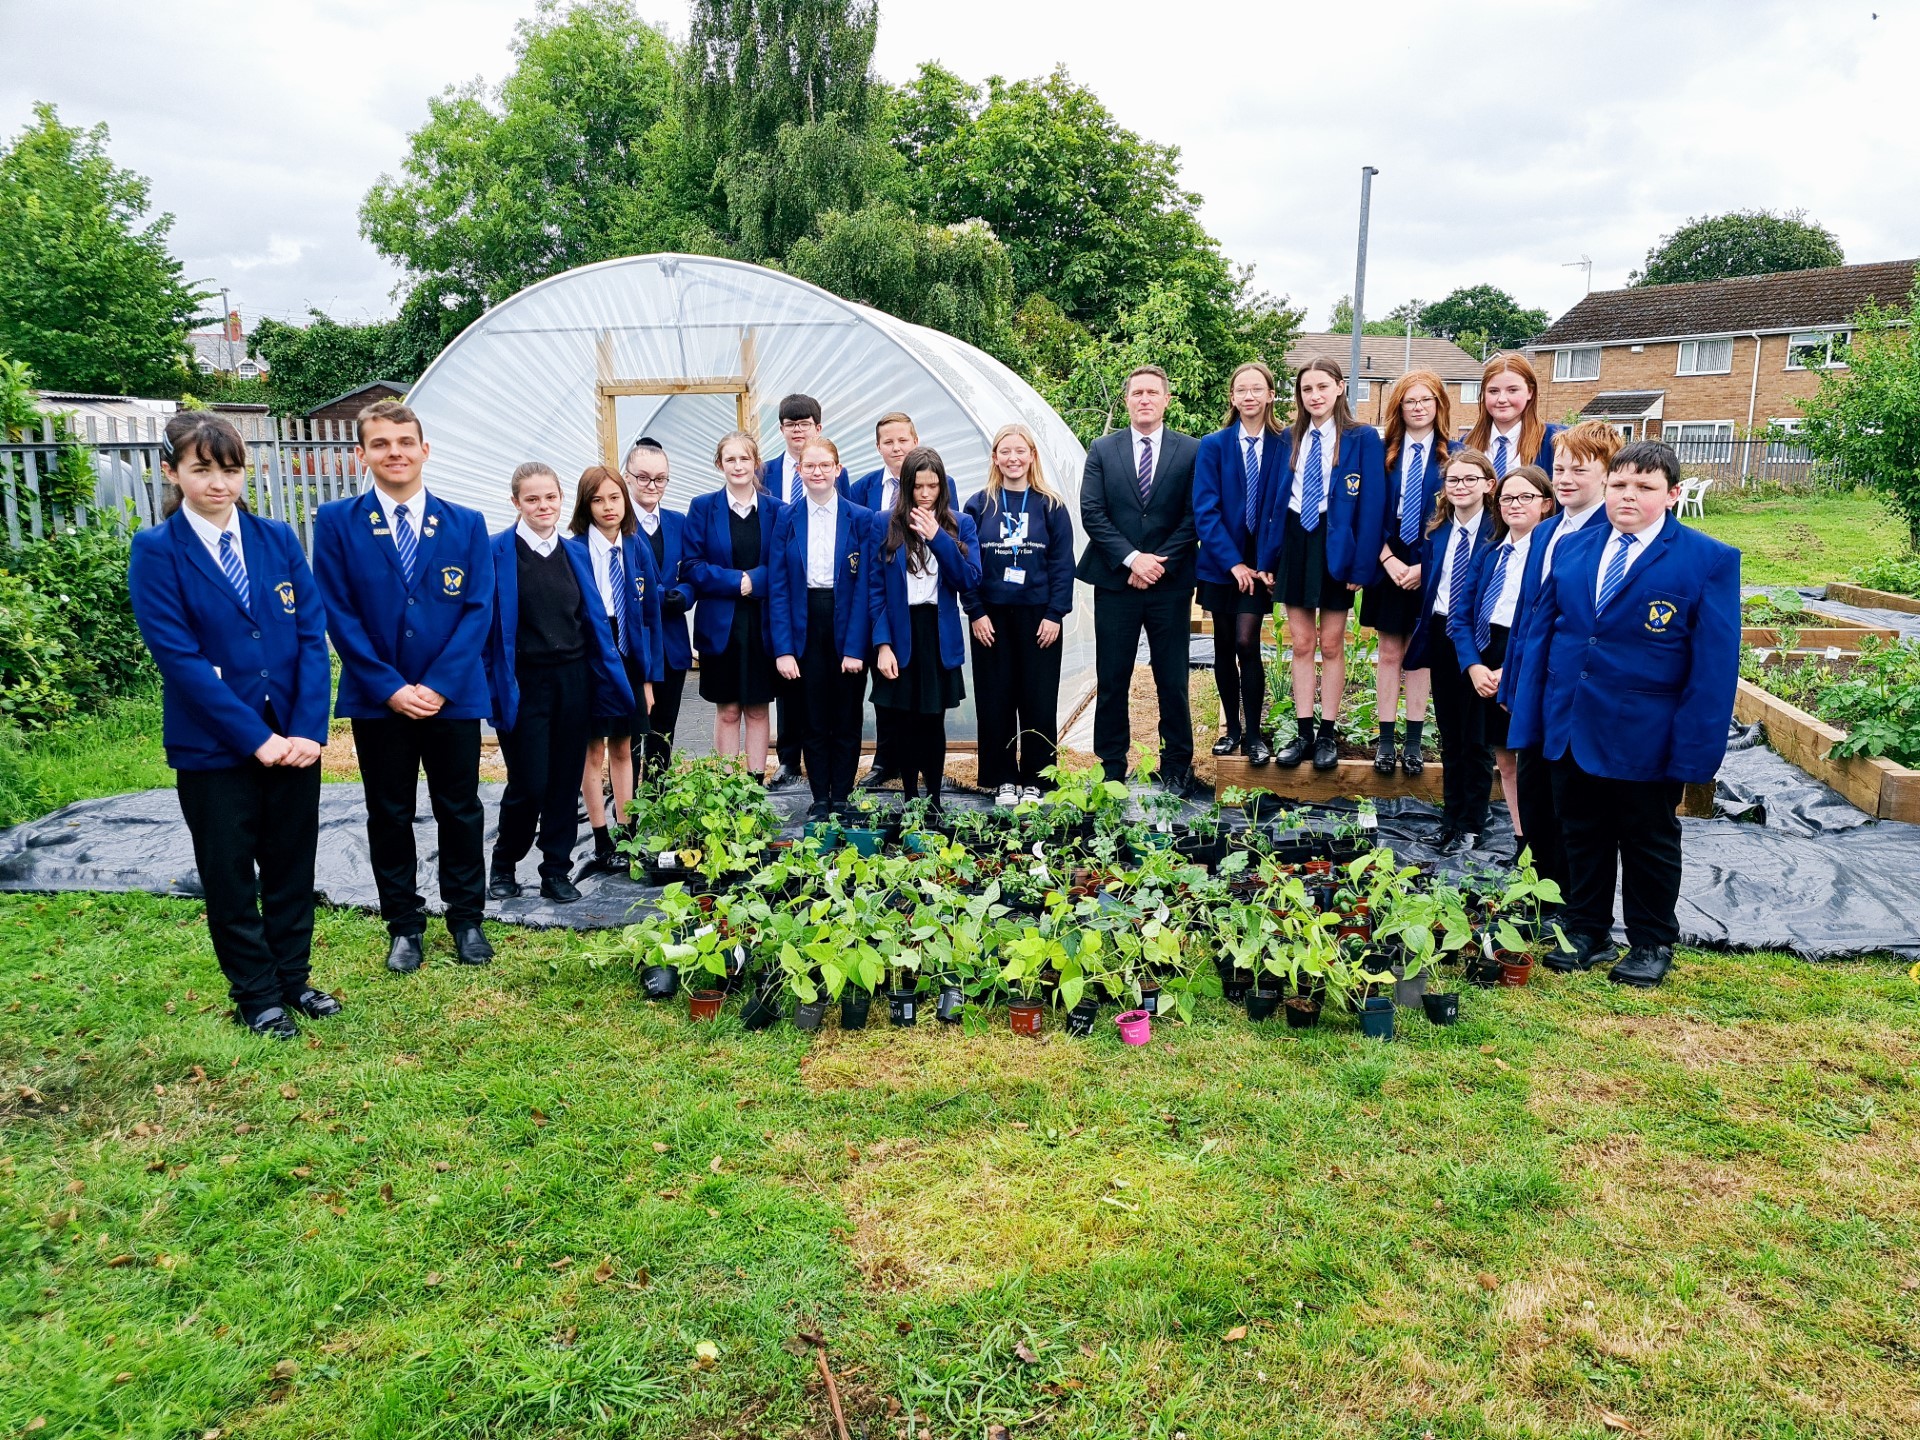  Ysgol Rhosnesni Nurture gardening team with headmaster Andy Brant and Chloe from the Nightingale House Hospice fundraising team, along with all the donated plants.